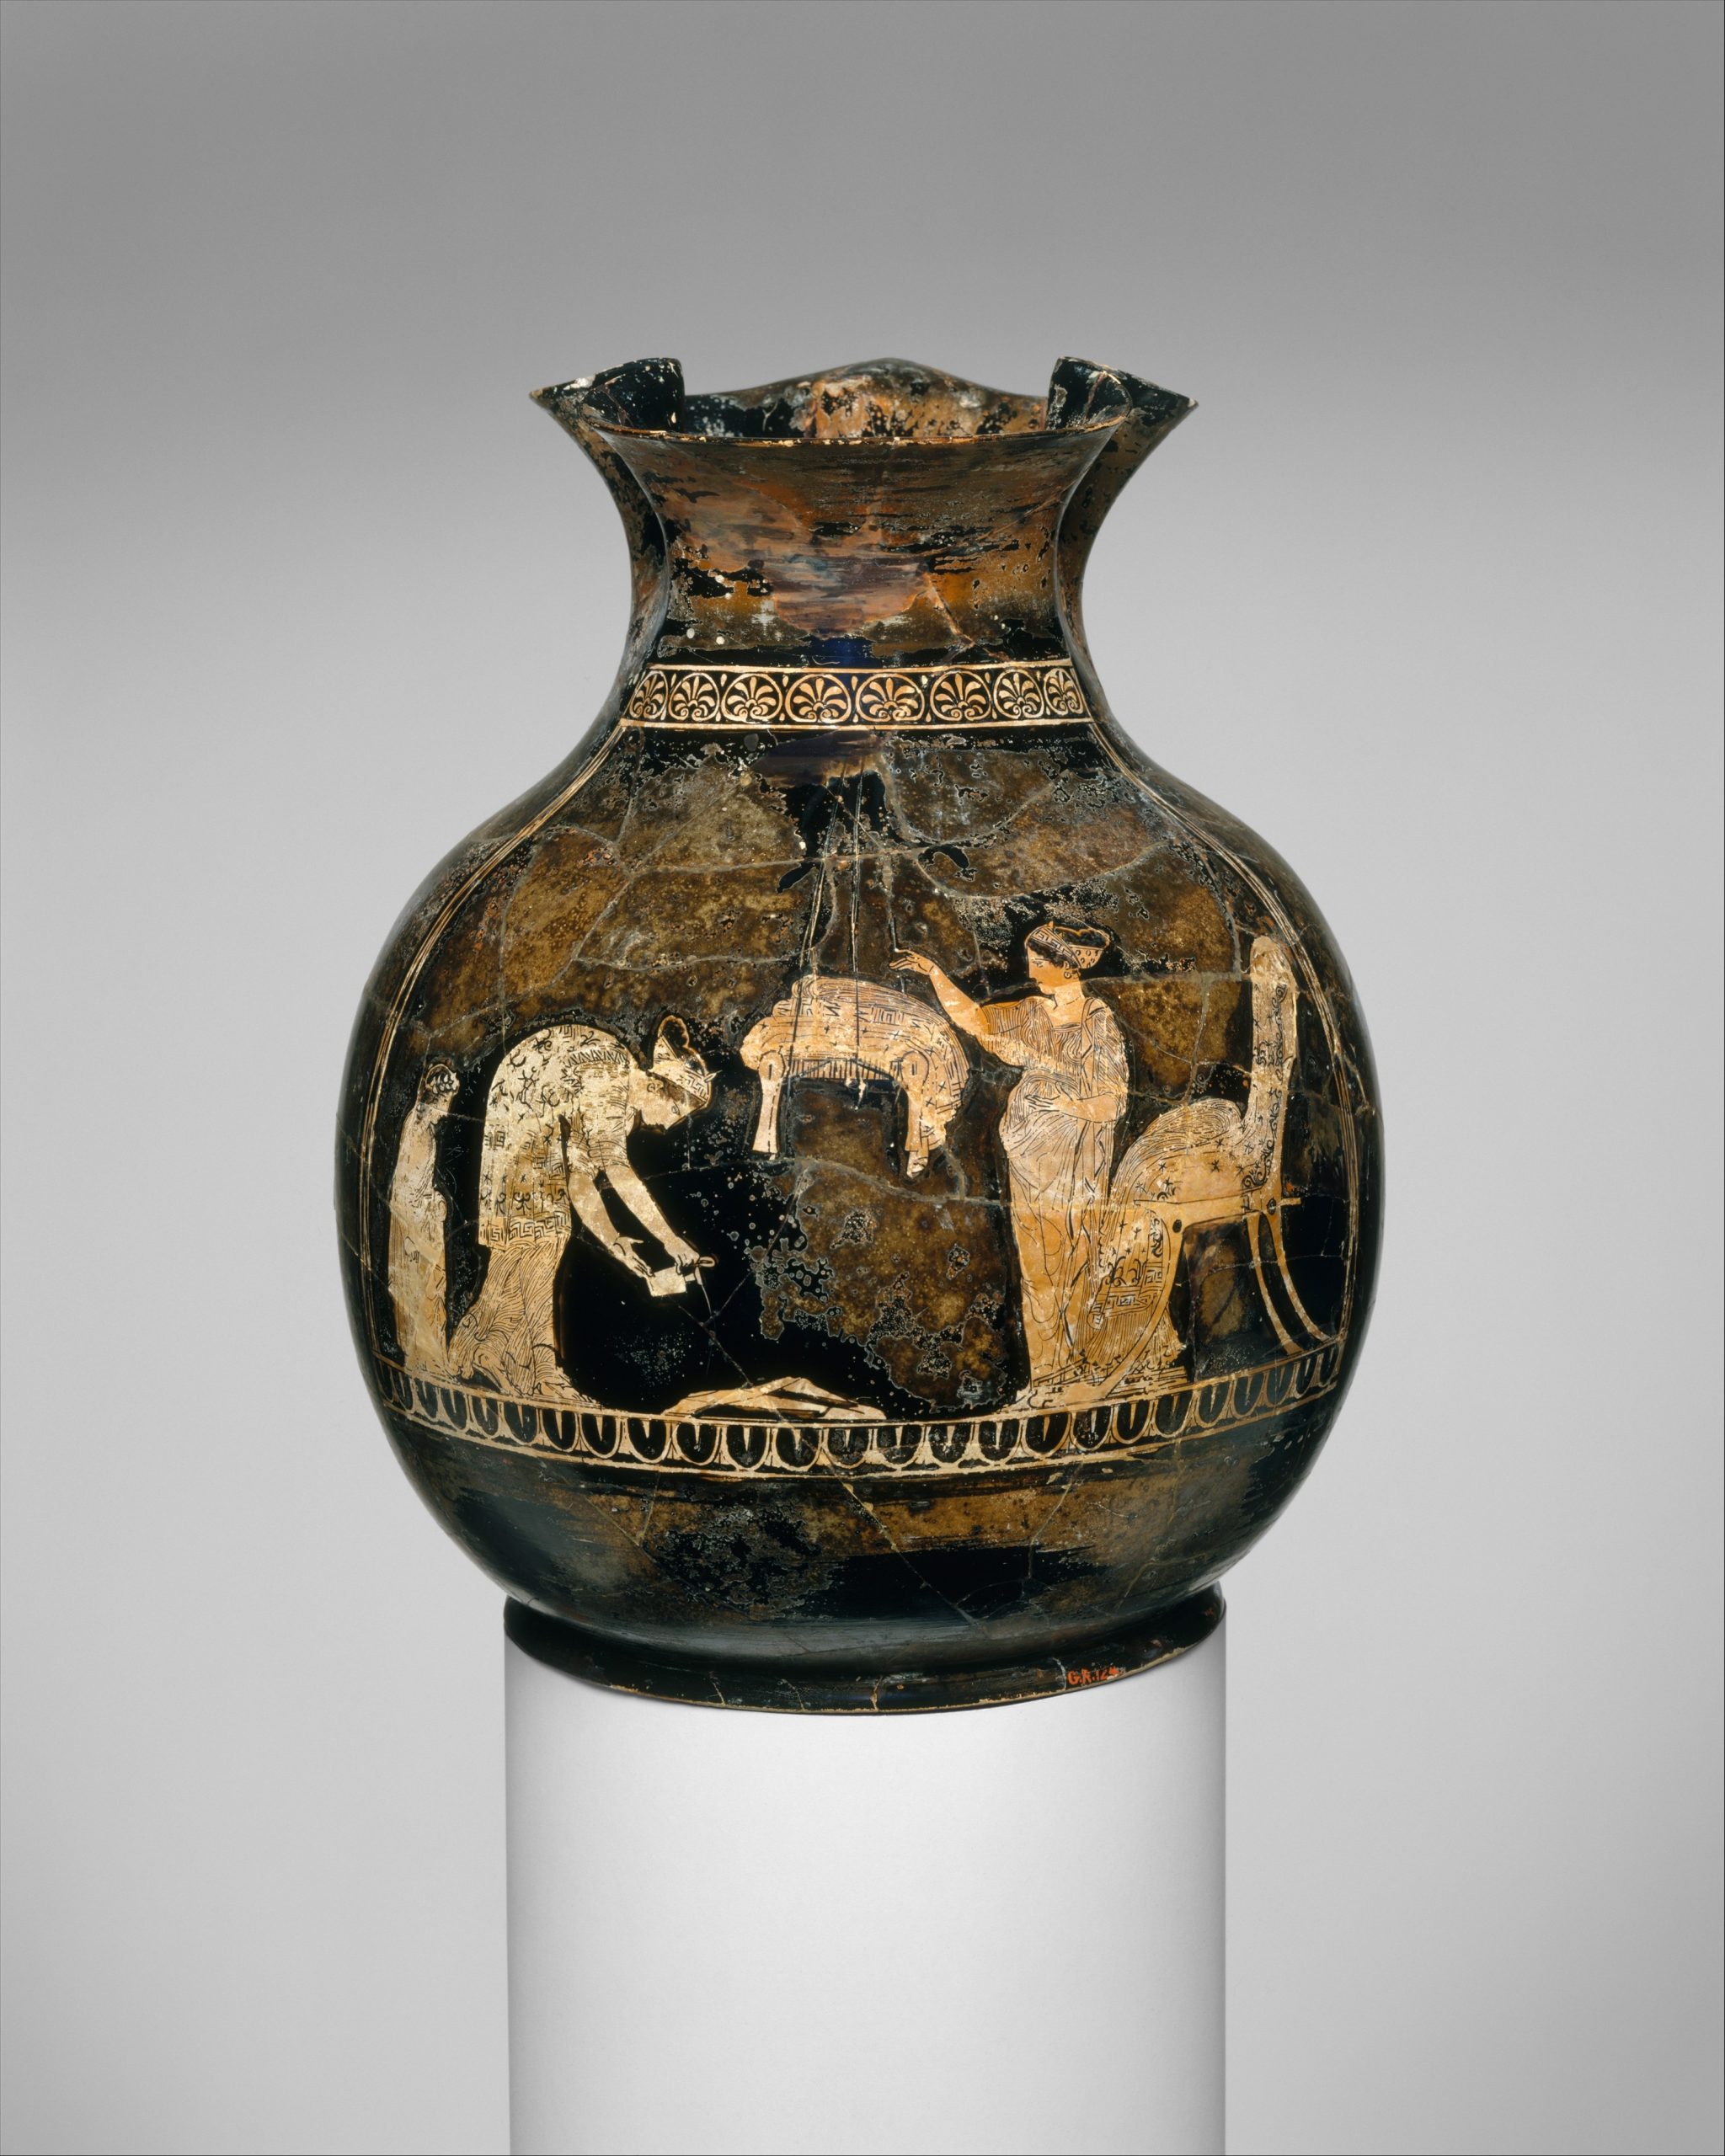 A terra cotta-red vase decorated with figures of women and animals.